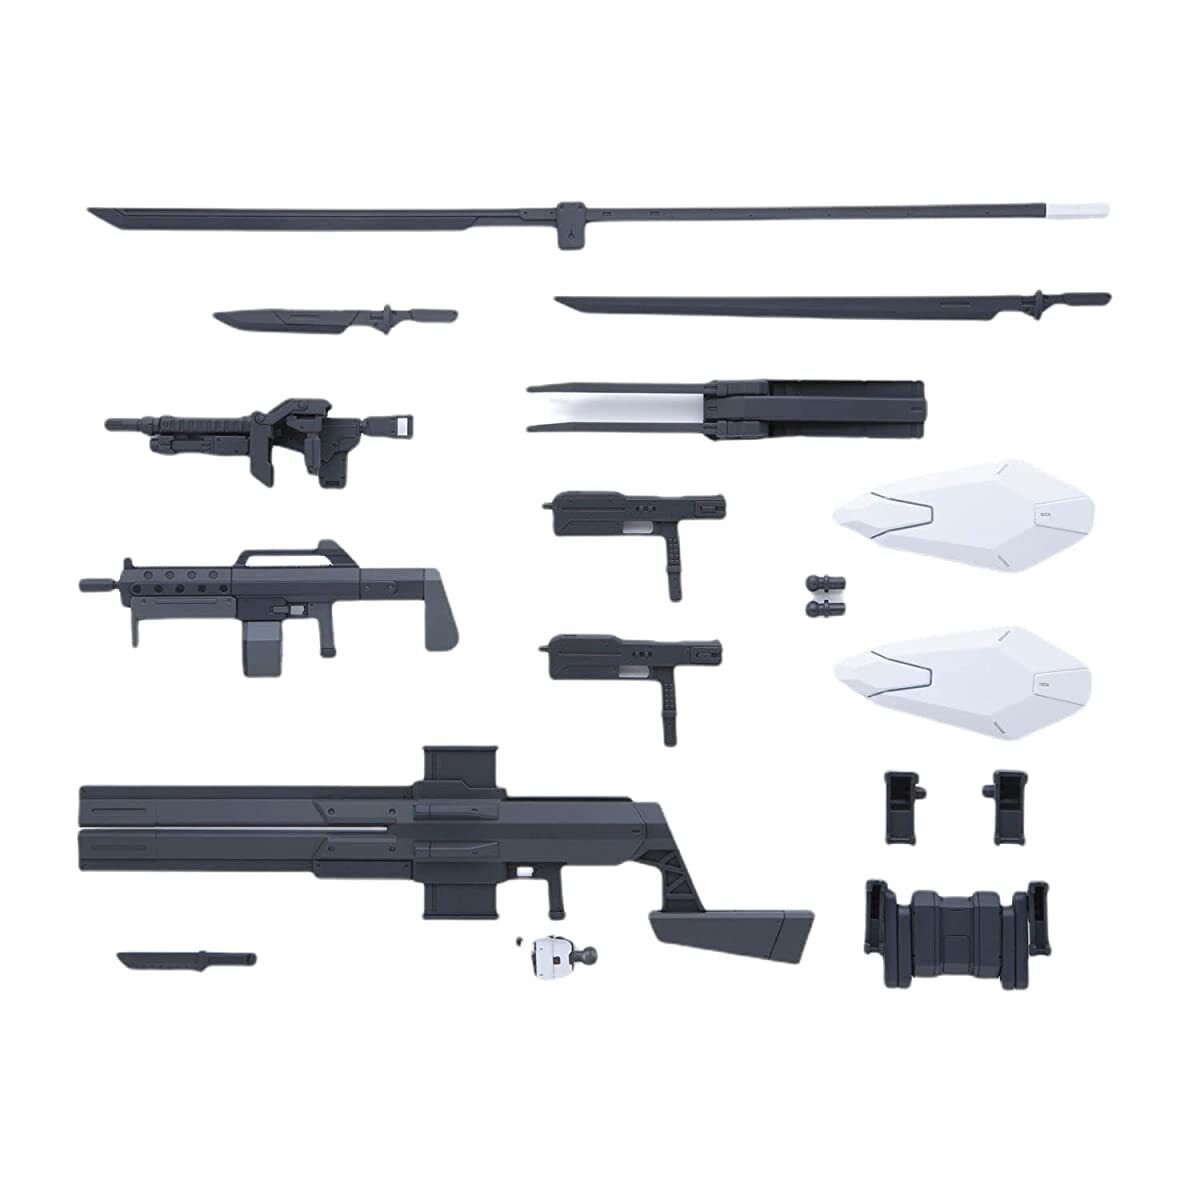 Picture of Bandai BAN2621333 1 - 72 Scale Amaim Warrior The Border Weapon Set